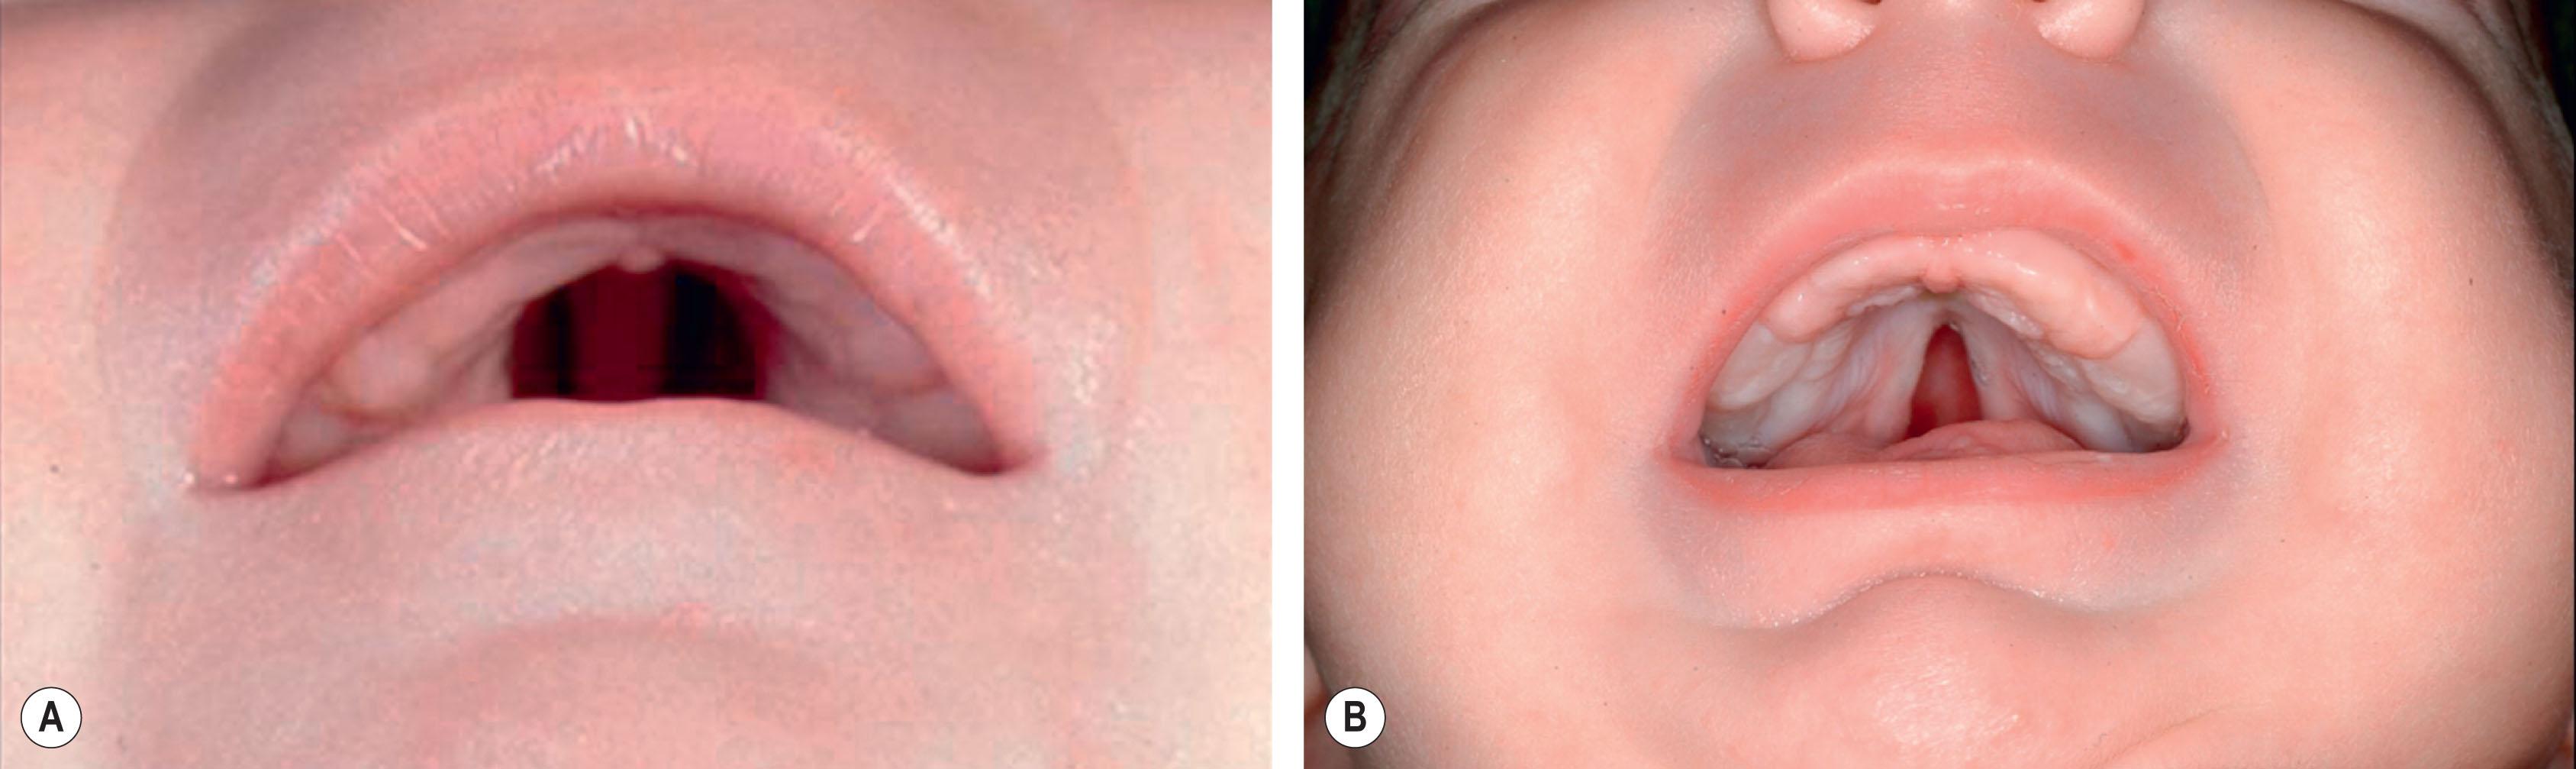 Figure 28.2, (A) This child with Robin sequence demonstrates the classic U-shaped cleft palate. (B) The cleft palate in Robin sequence may also take the form of a V.